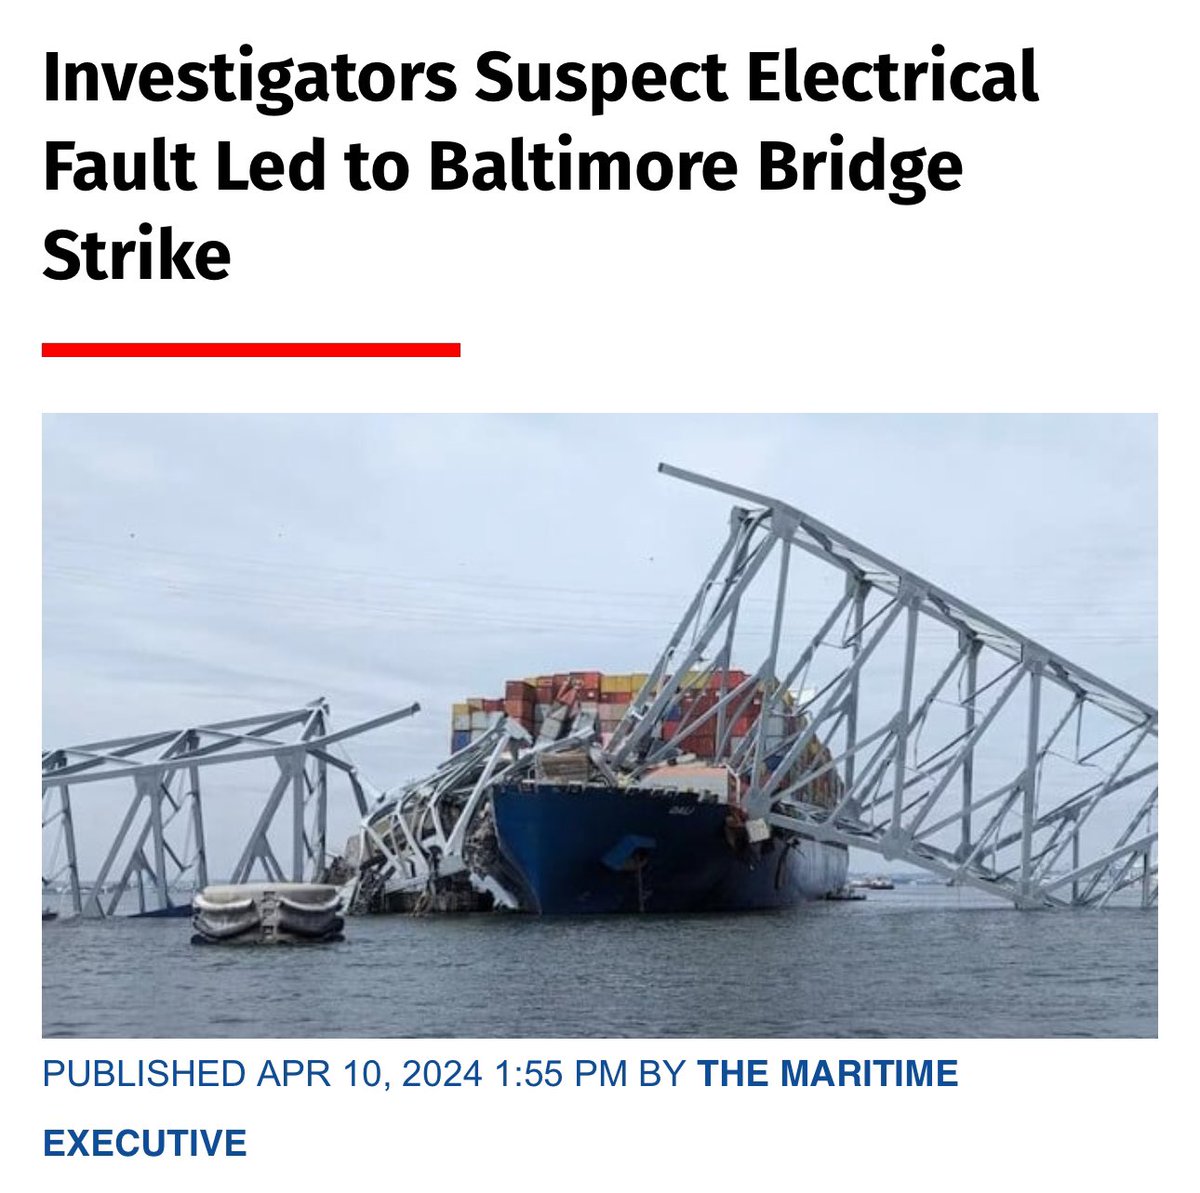 Leave no rocks unturned including cyber… No mention by NTSB of cyber intrusions as under investigation - why? This needs to be checked and explicitly ruled out: “In the early hours of March 26, the Dali lost all power and propulsion as she approached Baltimore's Francis Scott…